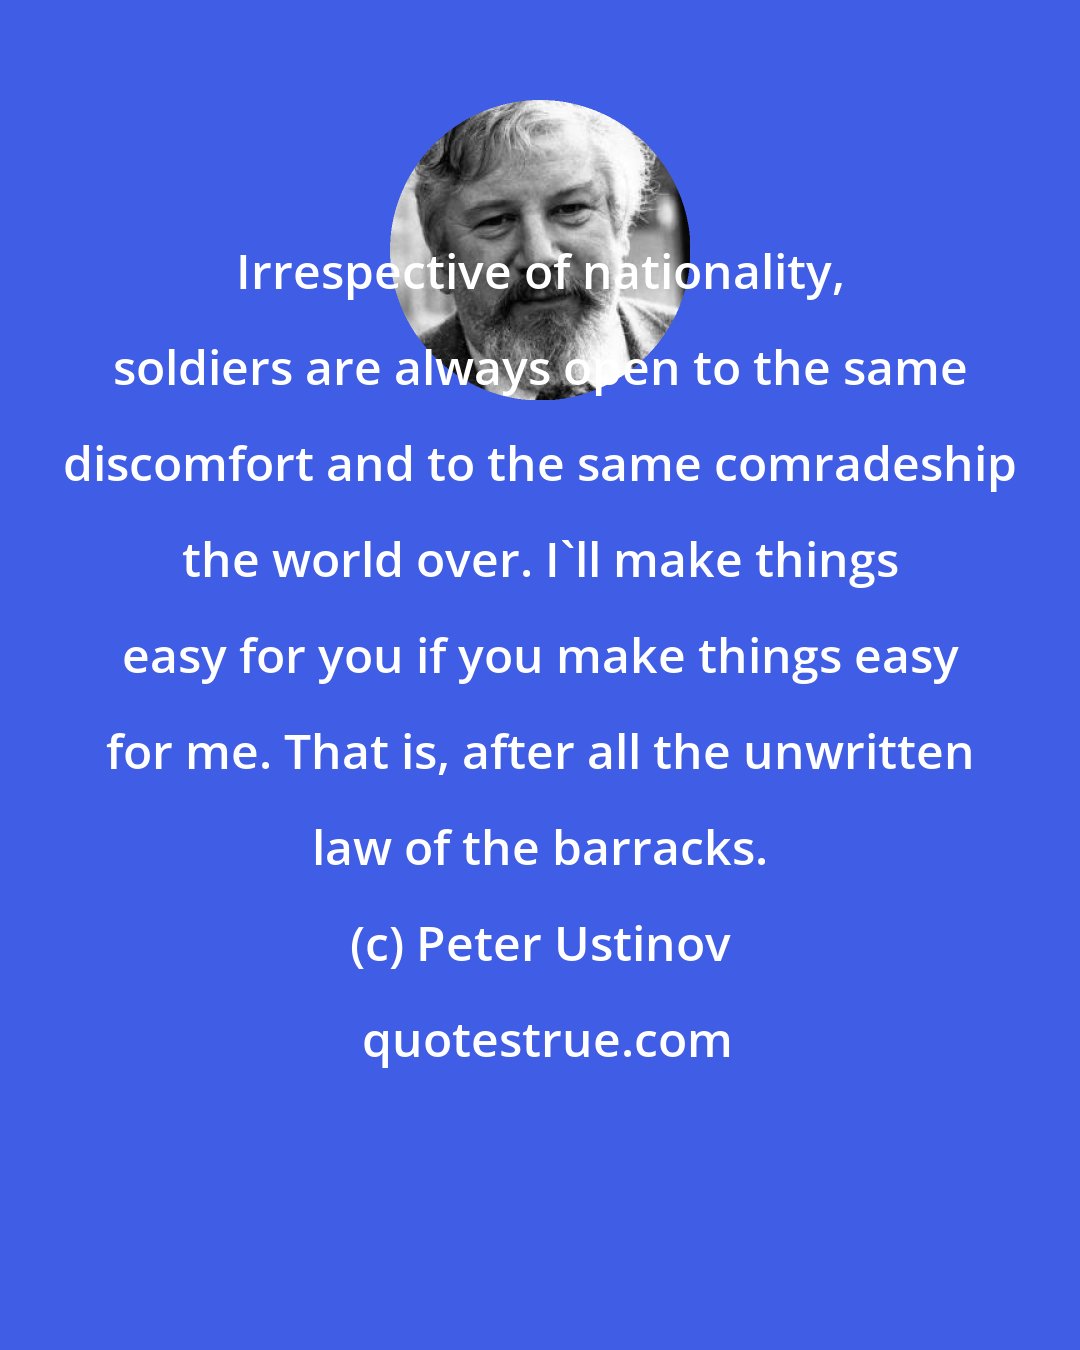 Peter Ustinov: Irrespective of nationality, soldiers are always open to the same discomfort and to the same comradeship the world over. I'll make things easy for you if you make things easy for me. That is, after all the unwritten law of the barracks.